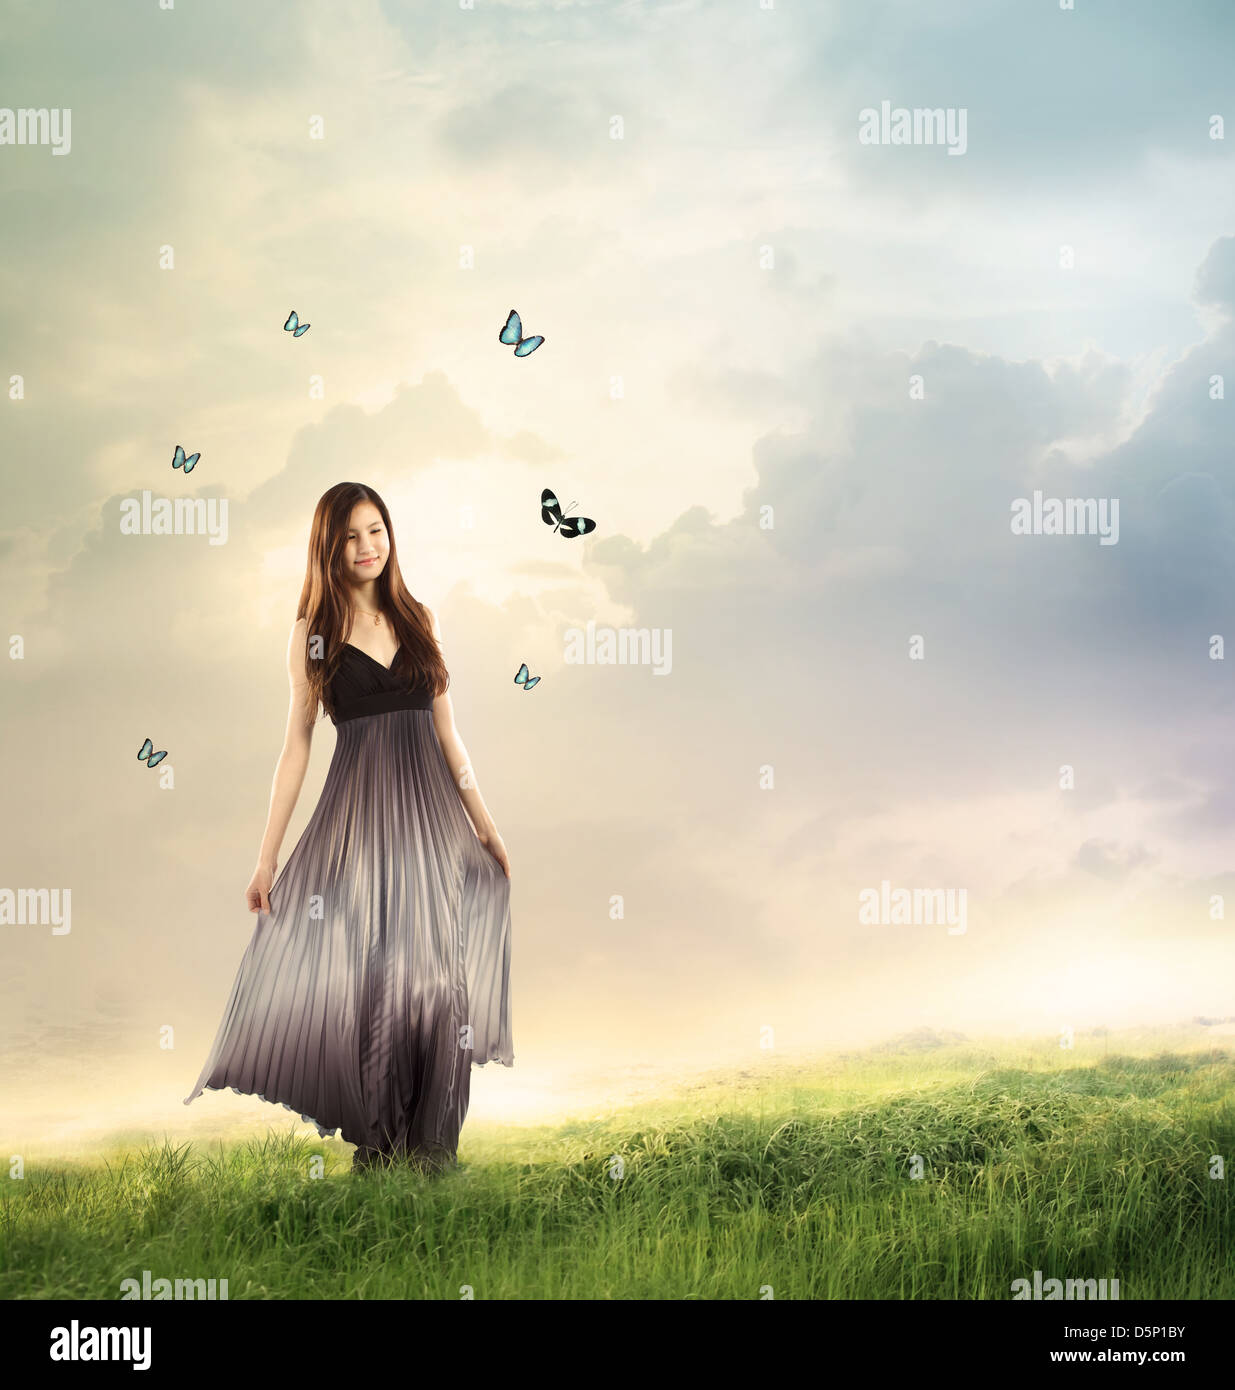 Young woman in a beautiful silver dress in a fantasy landscape with butterflies Stock Photo